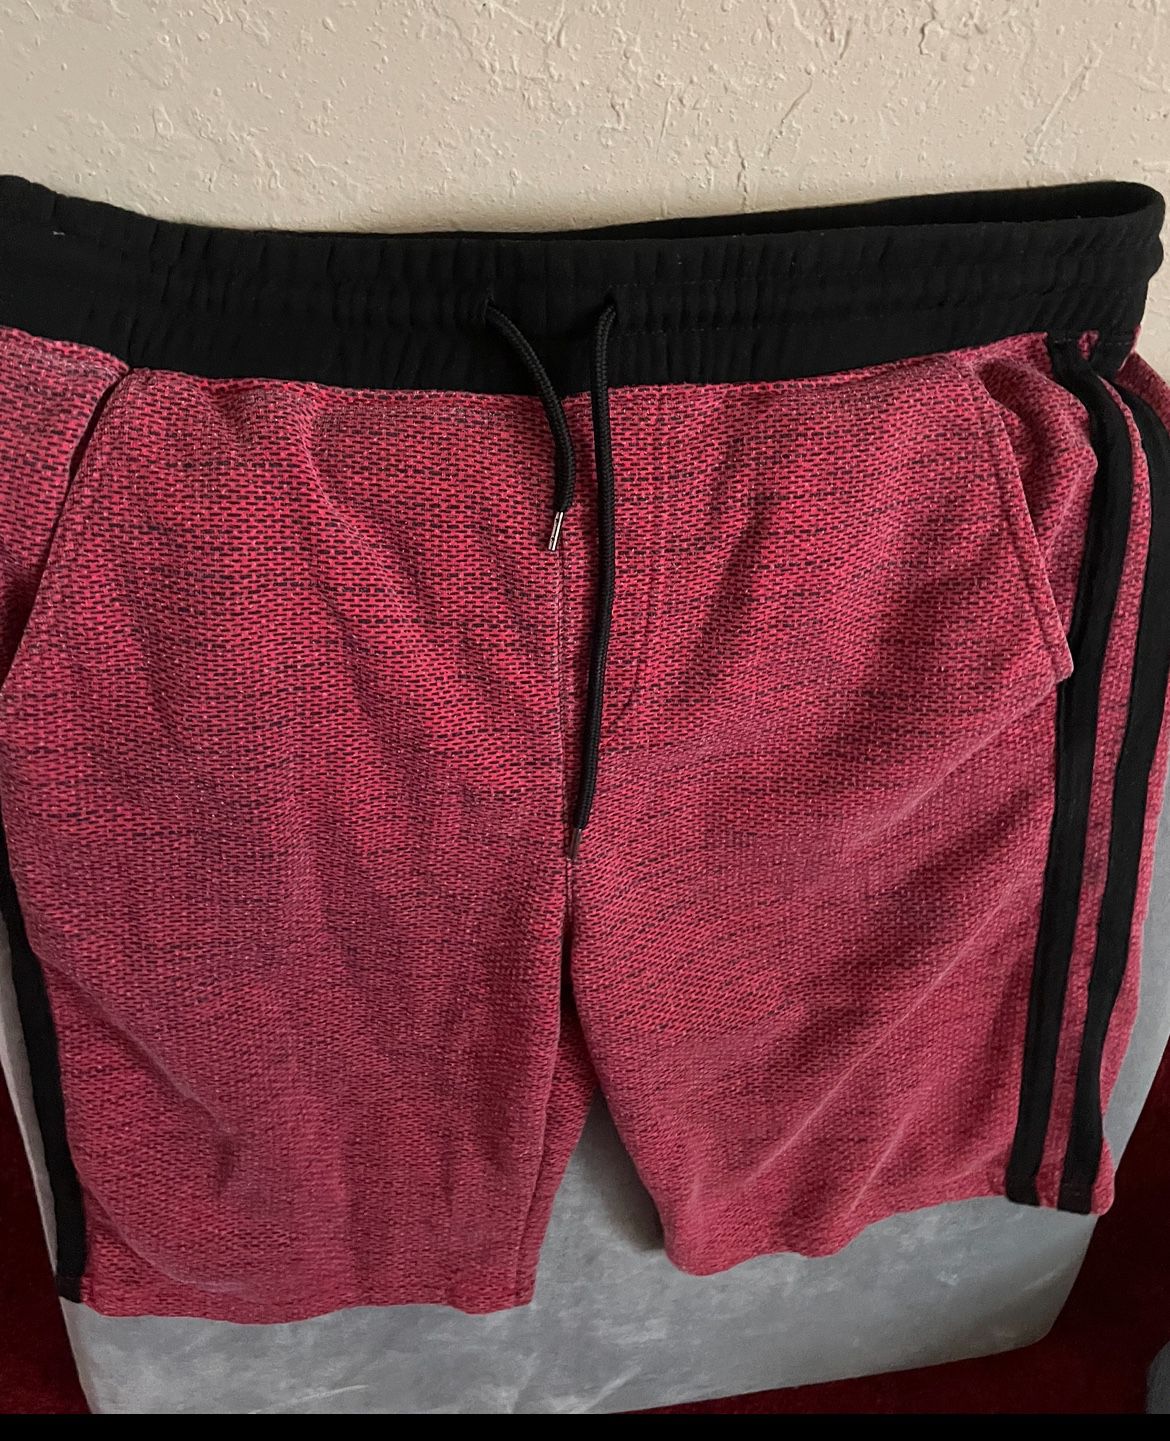 Men’s every day, comfy short size medium to extra large $15 each